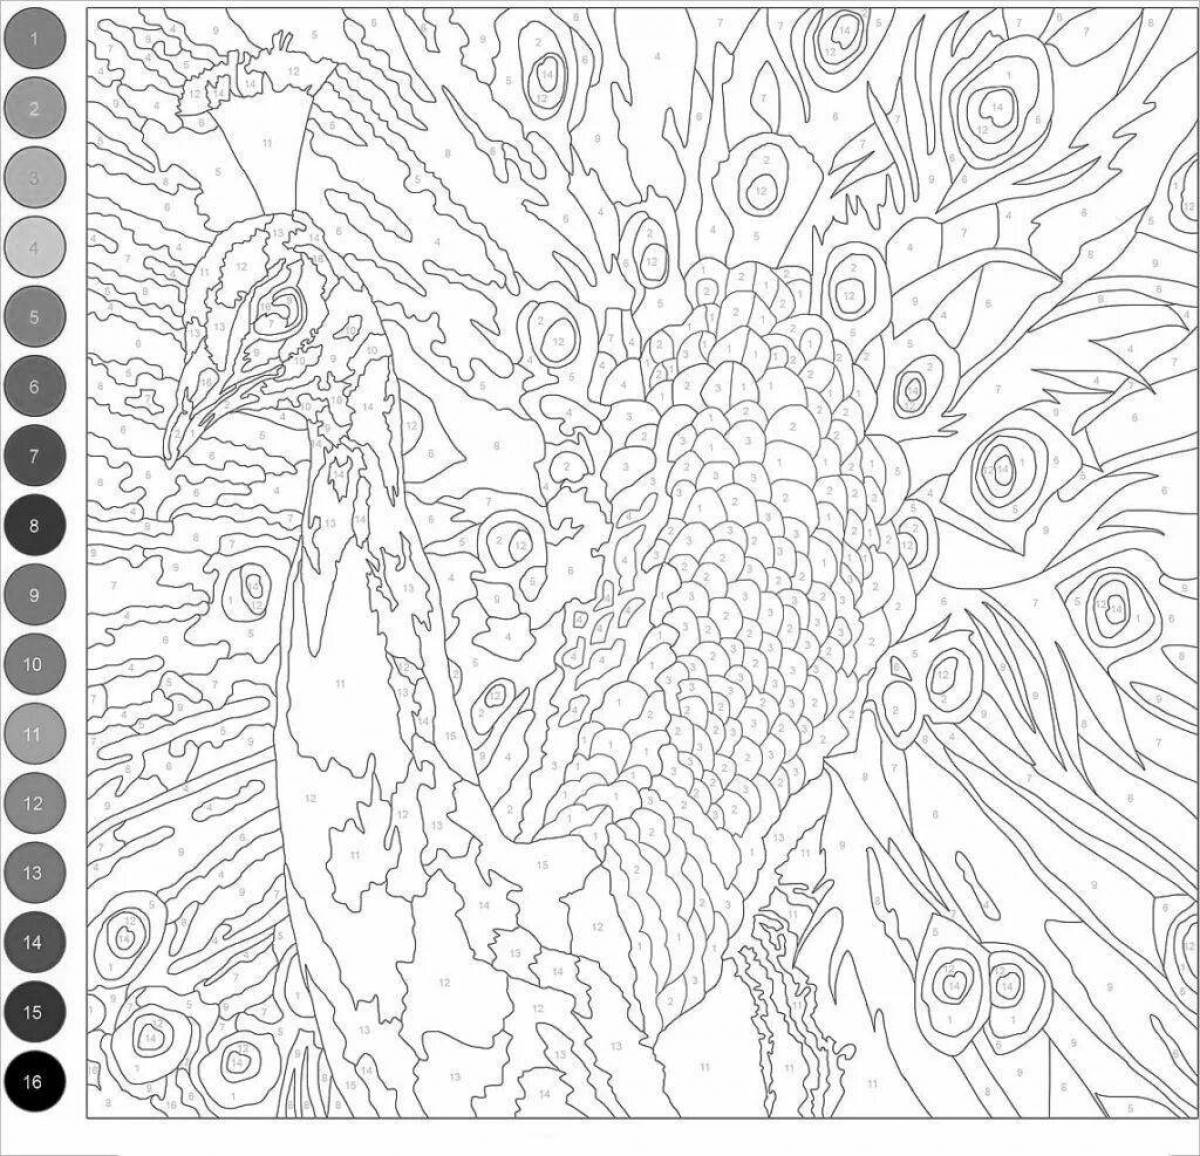 Fun coloring book enable color by number